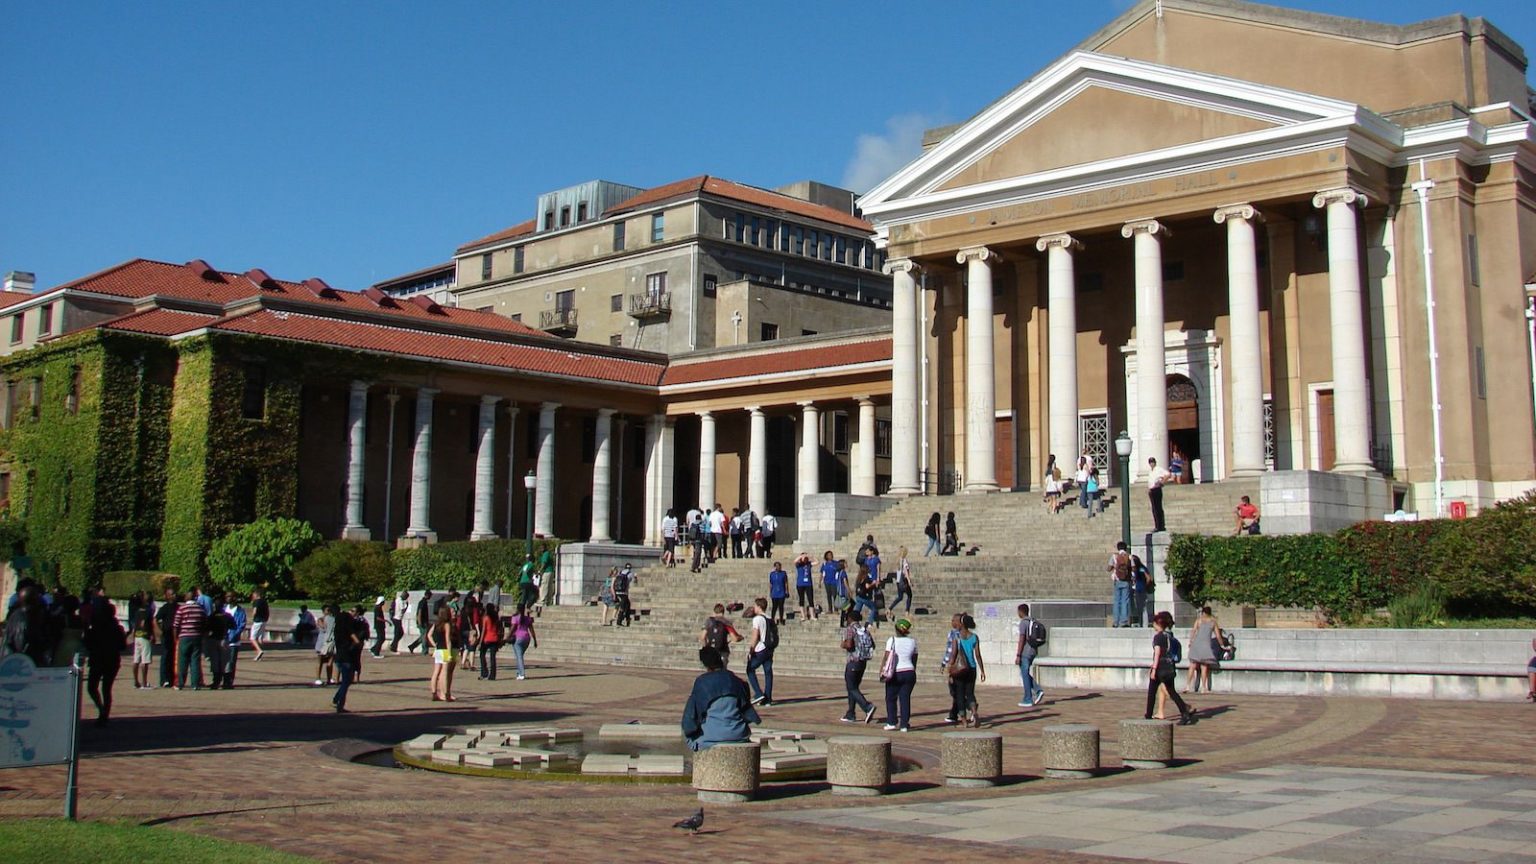 Top 20 Universities In South Africa 2021 (Best South African